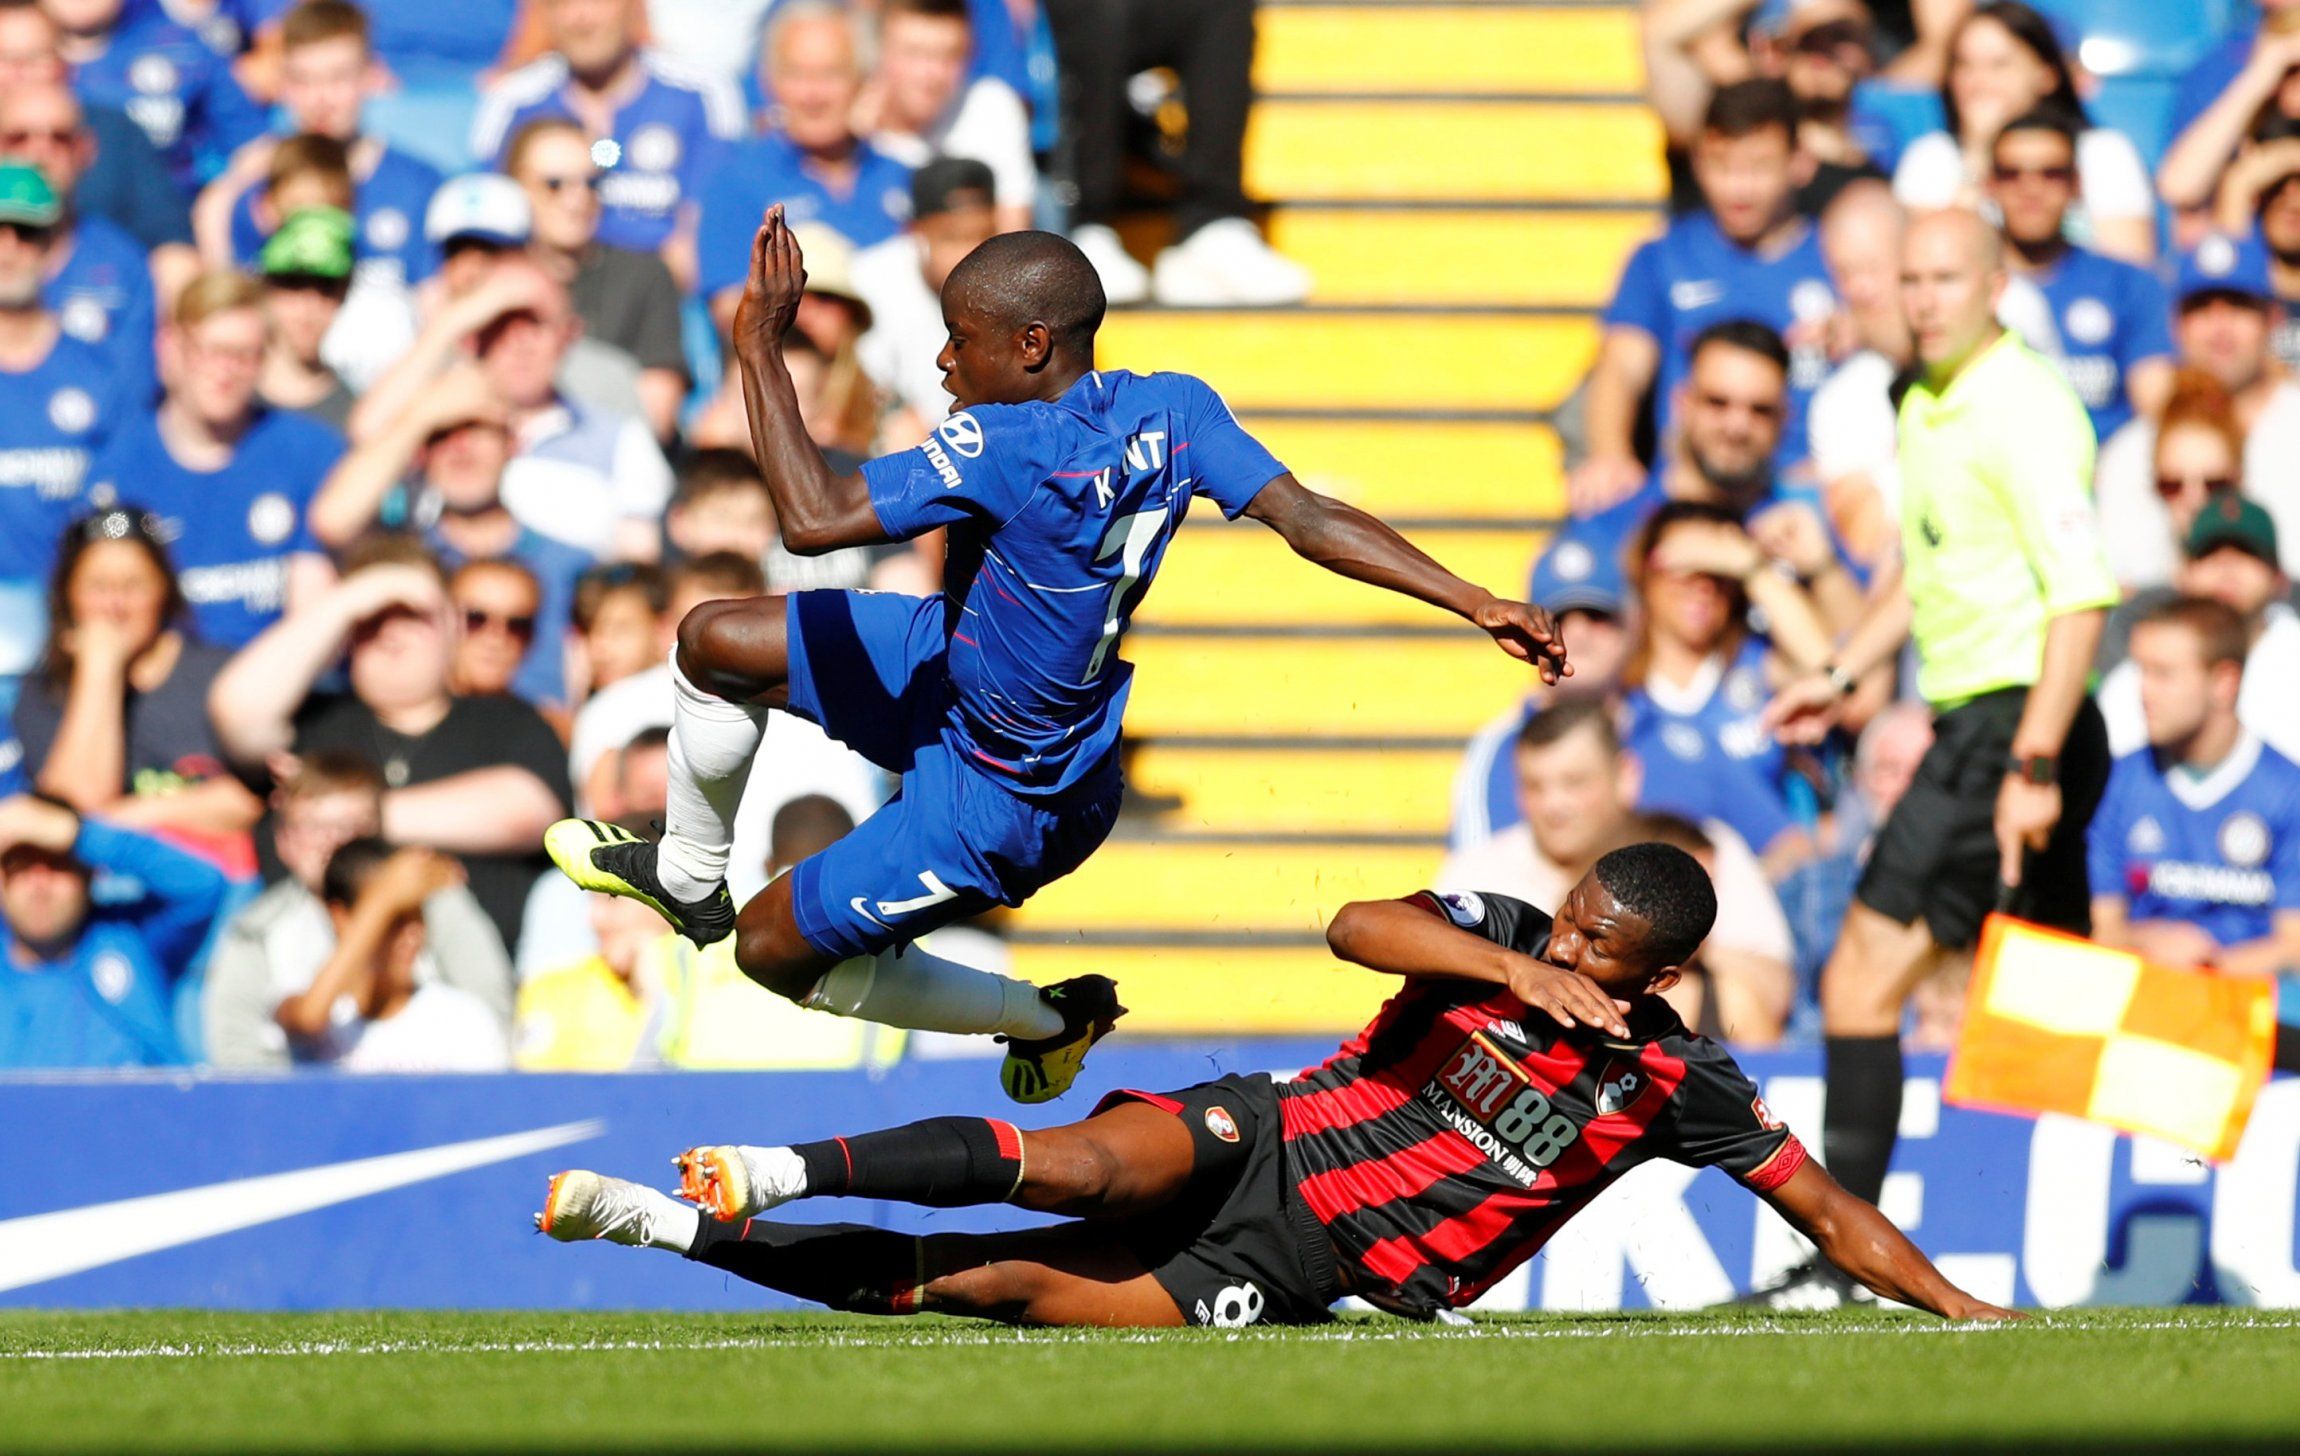 Bournemouth's Jefferson Lerma slides in on Chelsea's N'Golo Kante